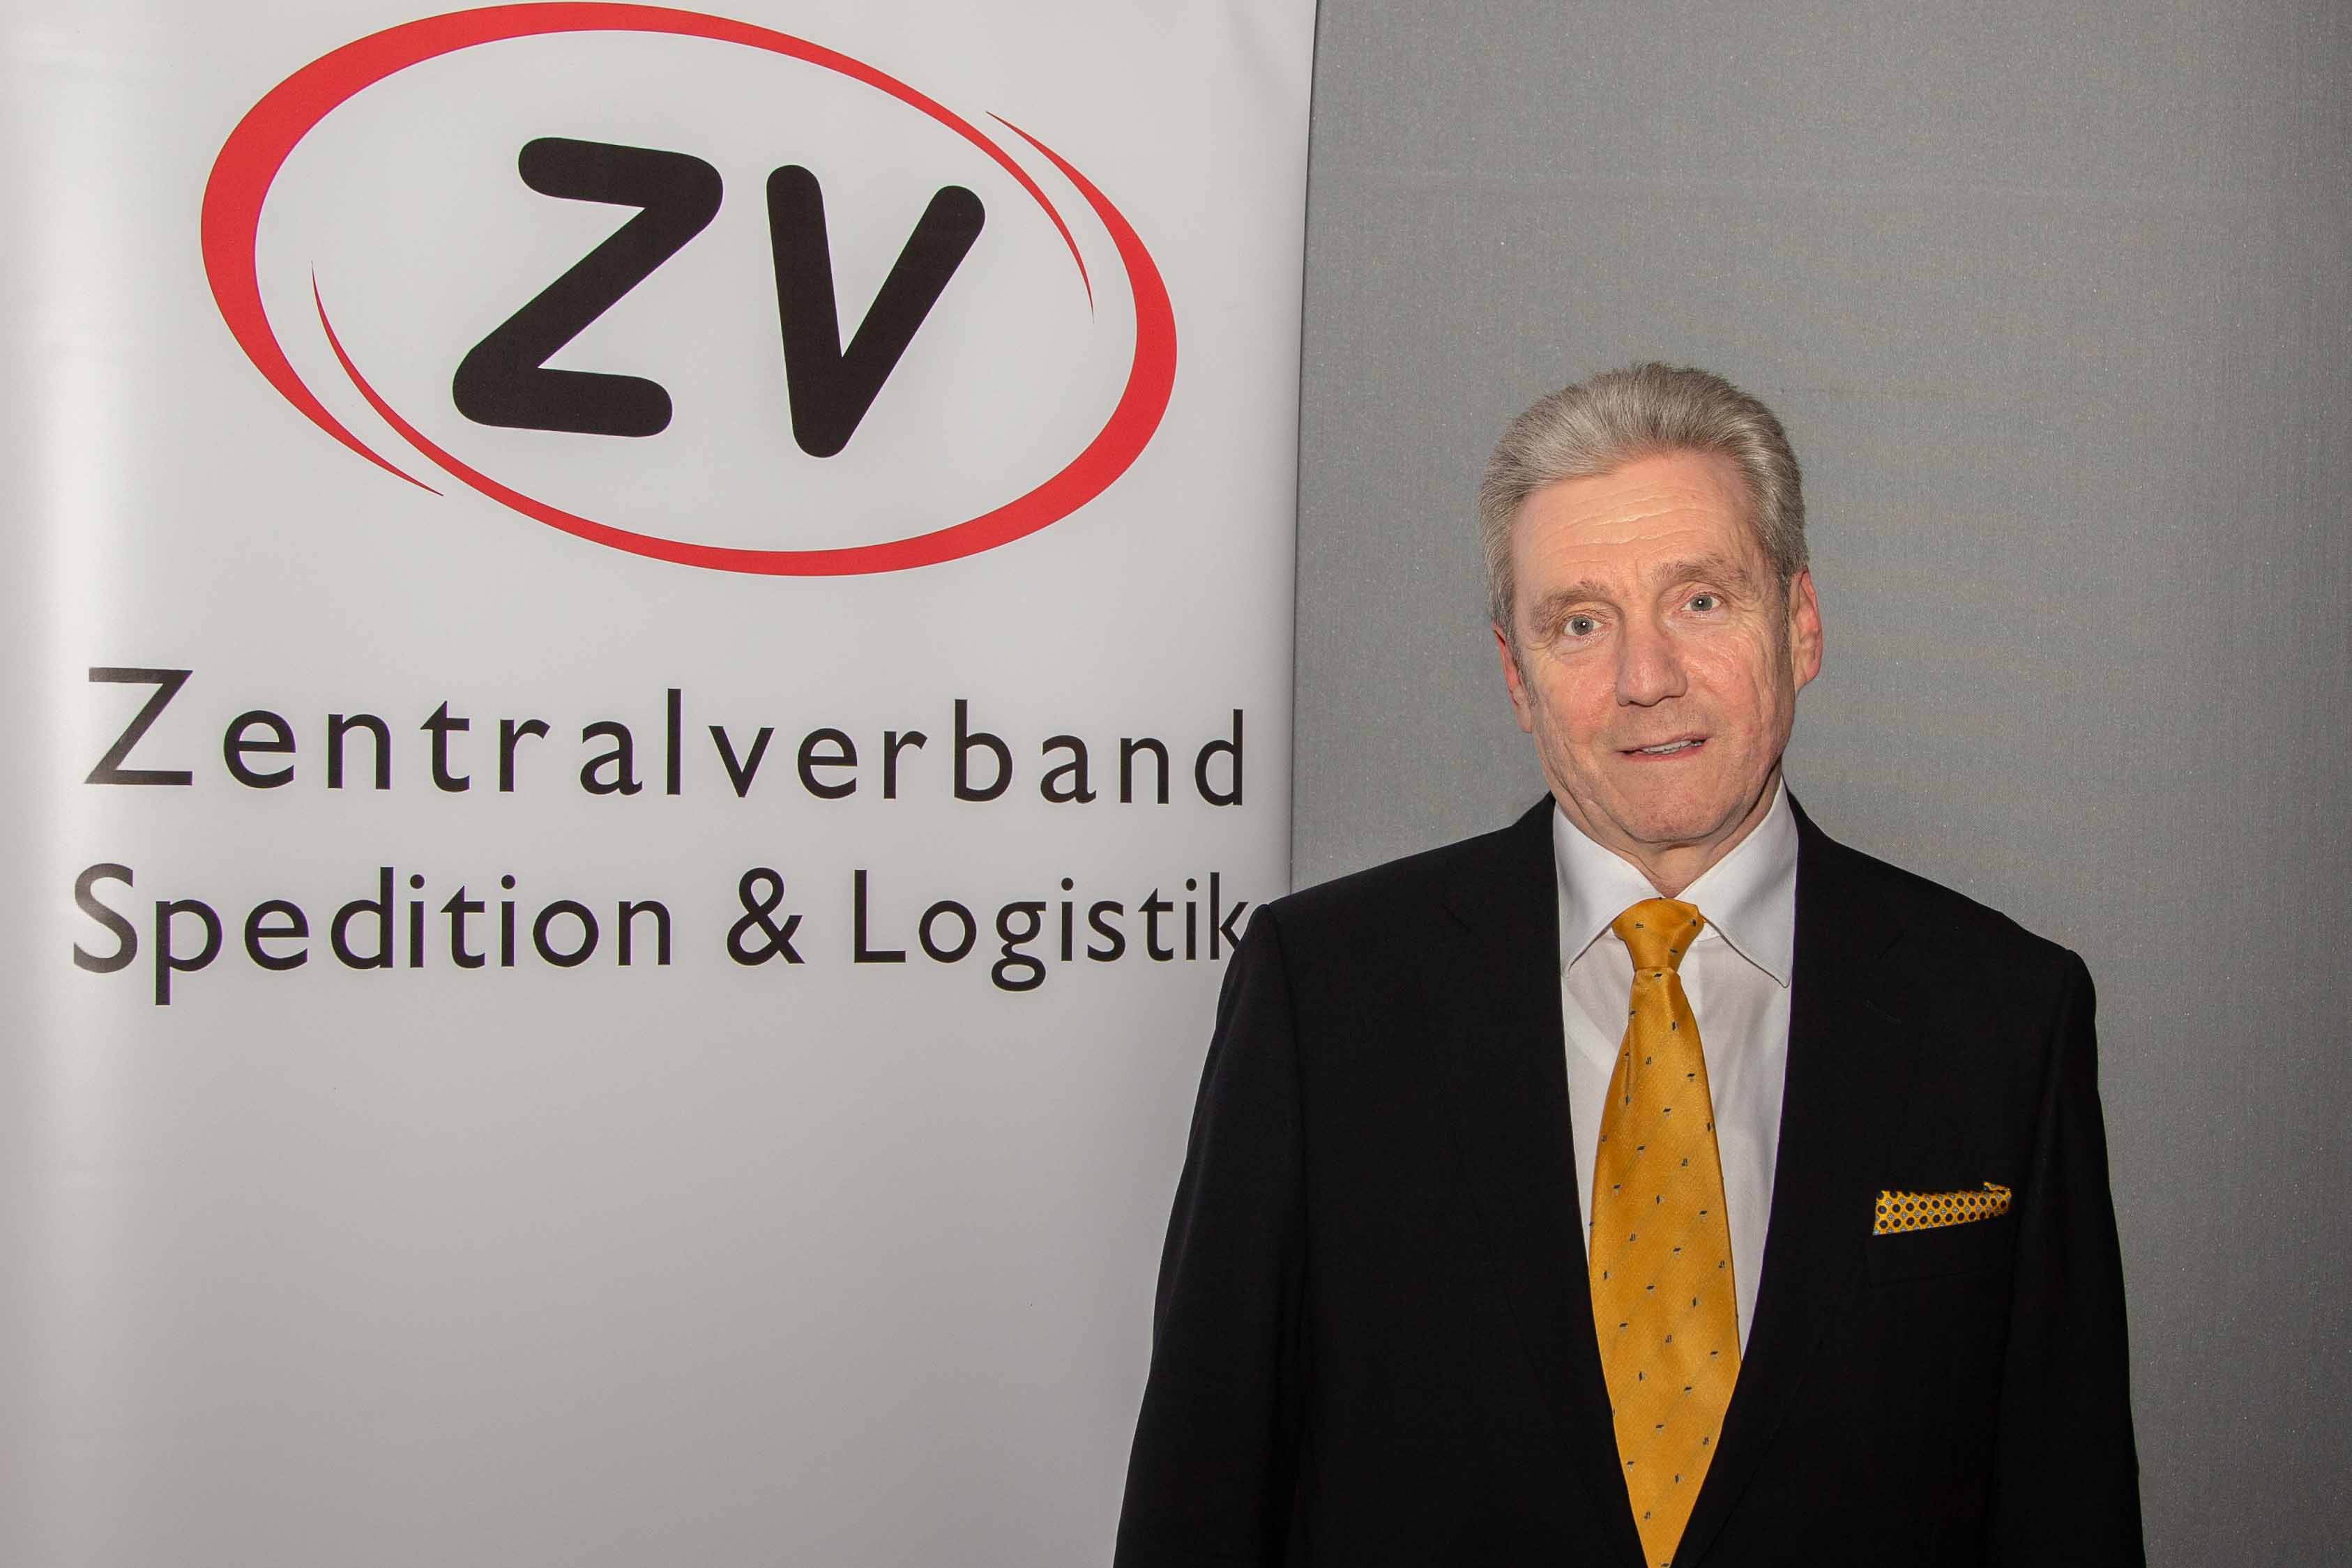 Alexander Friesz is the new President of the ZV Spedition & Logistik